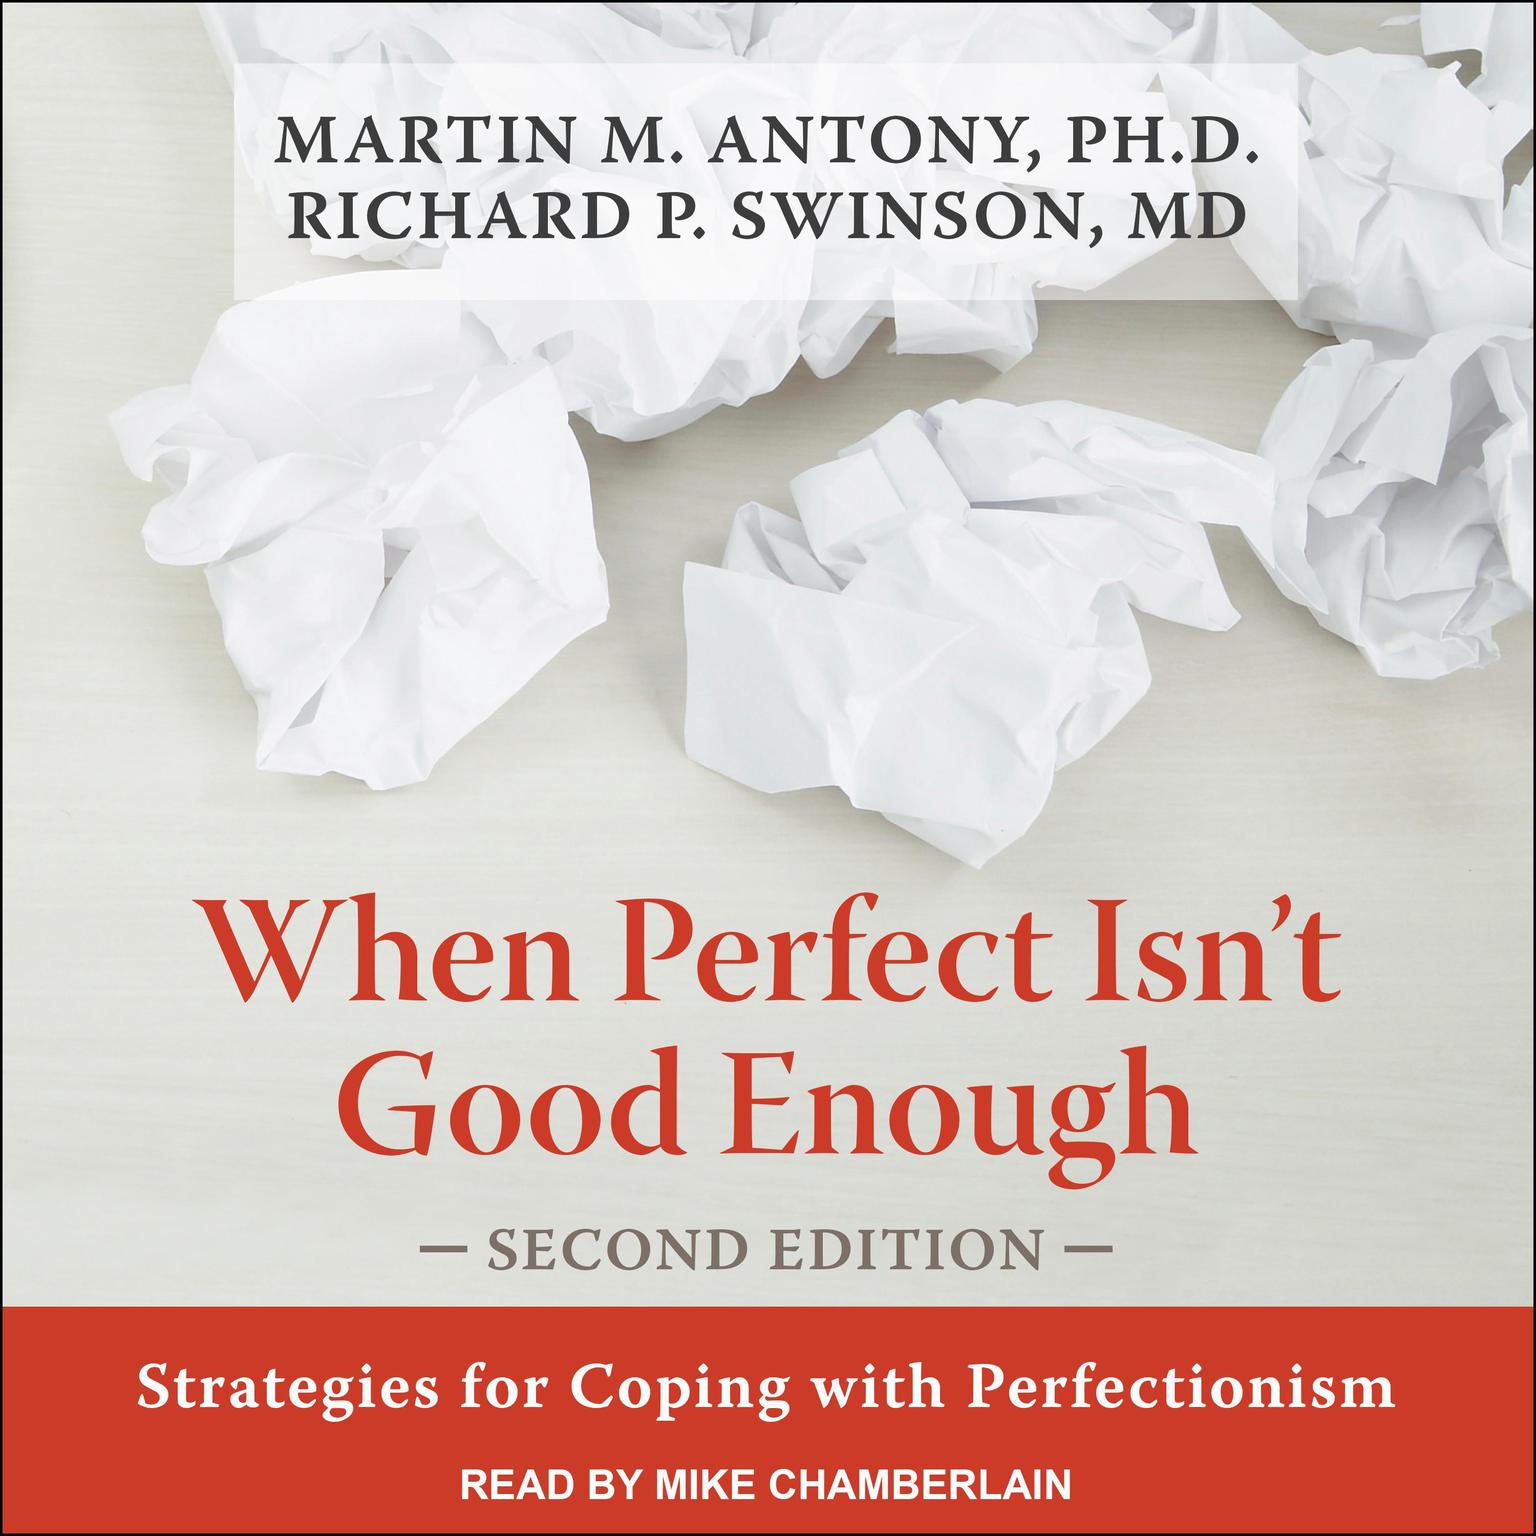 When Perfect Isnt Good Enough: Strategies for Coping with Perfectionism, Second Edition Audiobook, by Martin M. Antony